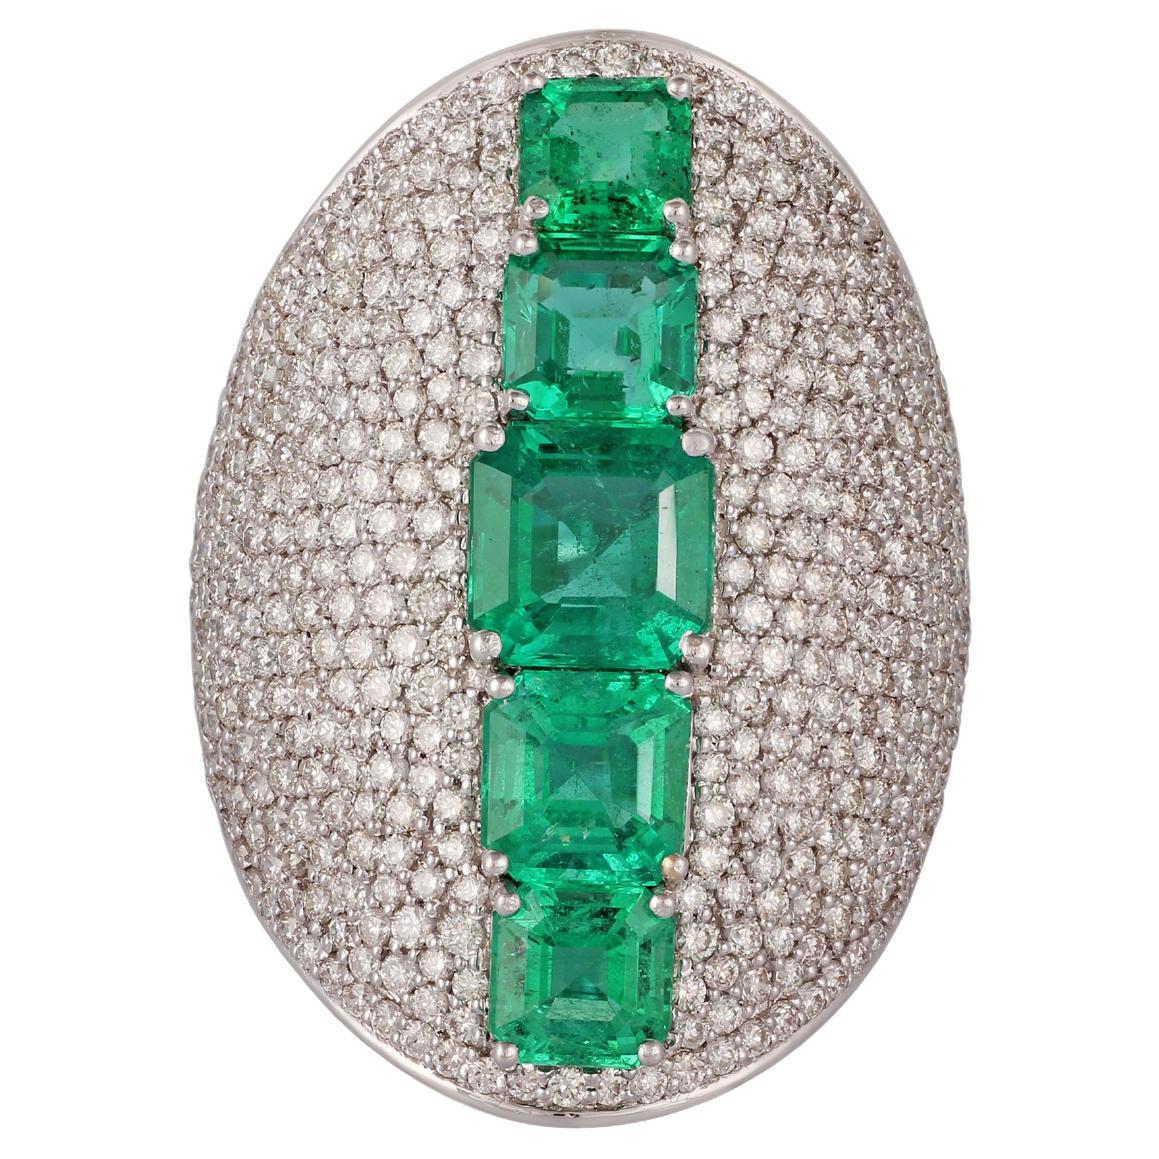 4.06 Carat Emerald & Diamond Cocktail Ring Set in White Gold For Sale